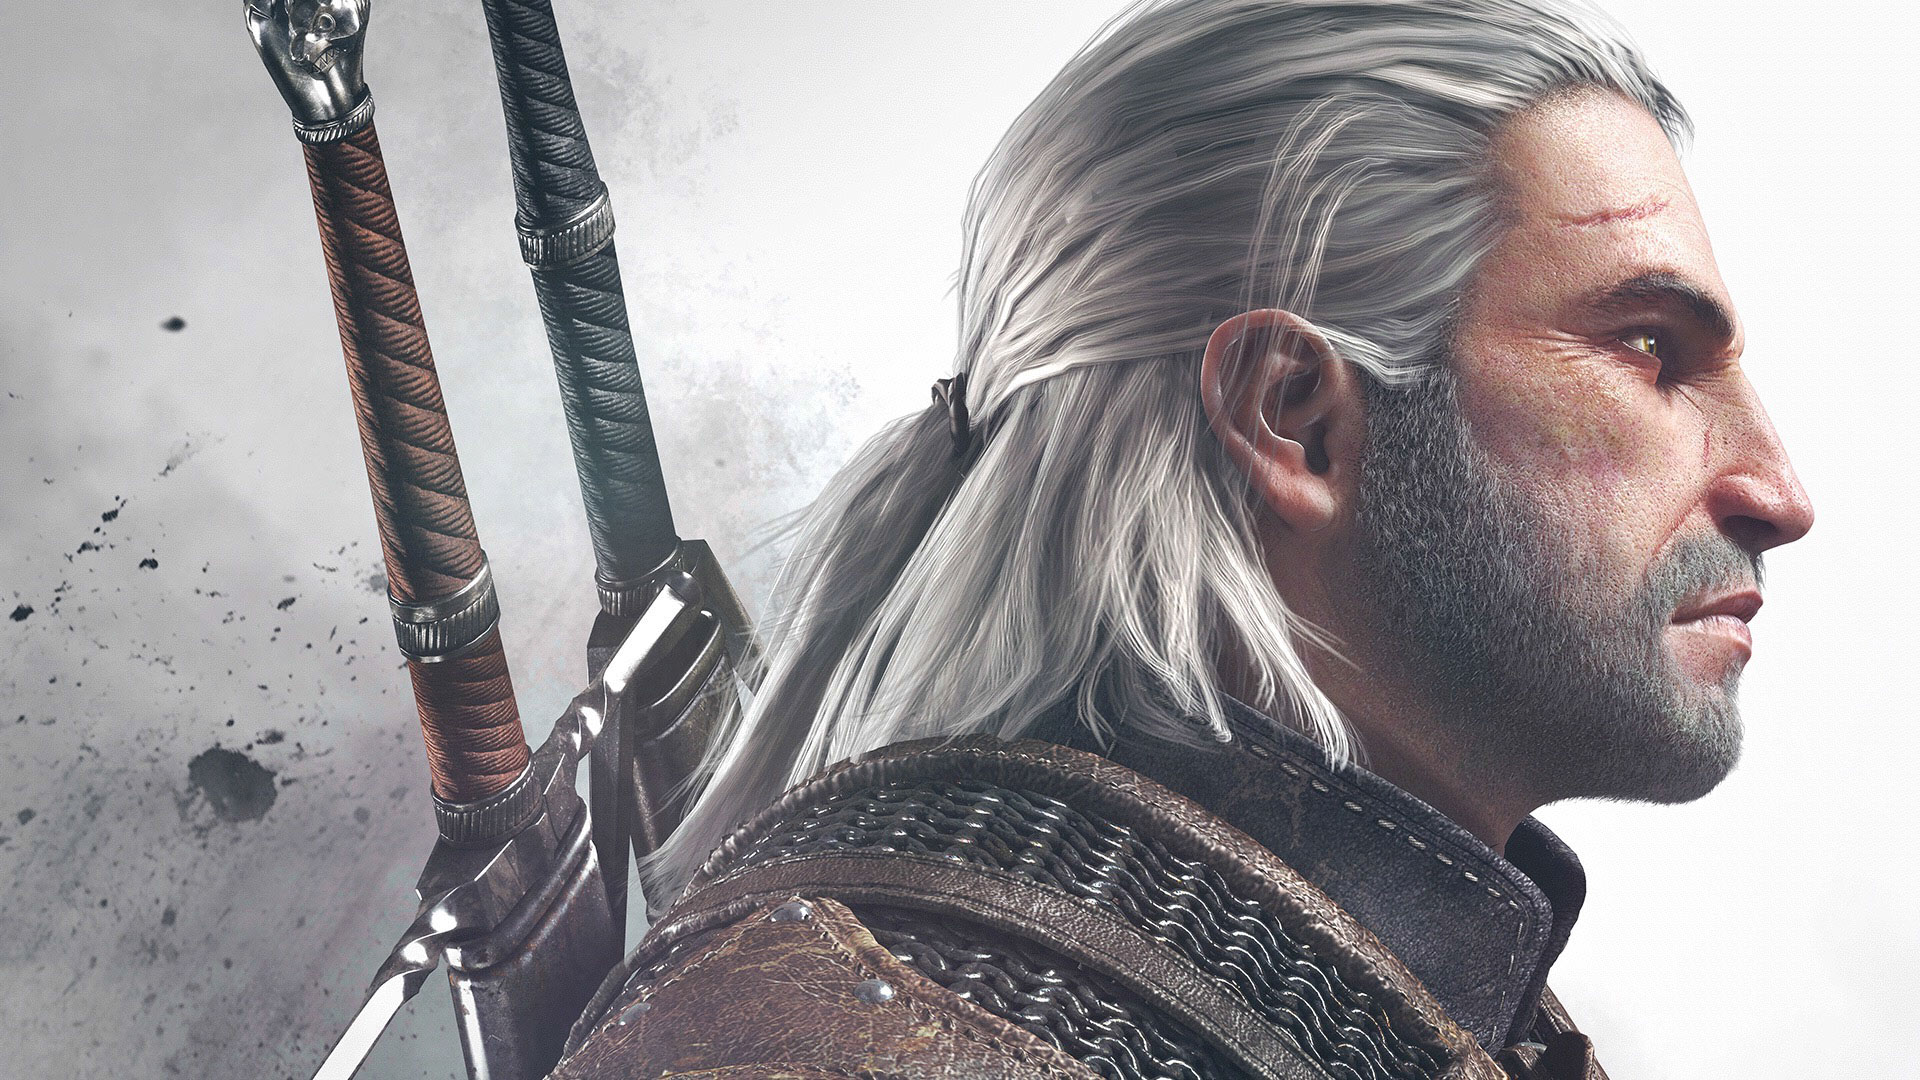 CDP: No Witcher 3 announce made last night - details